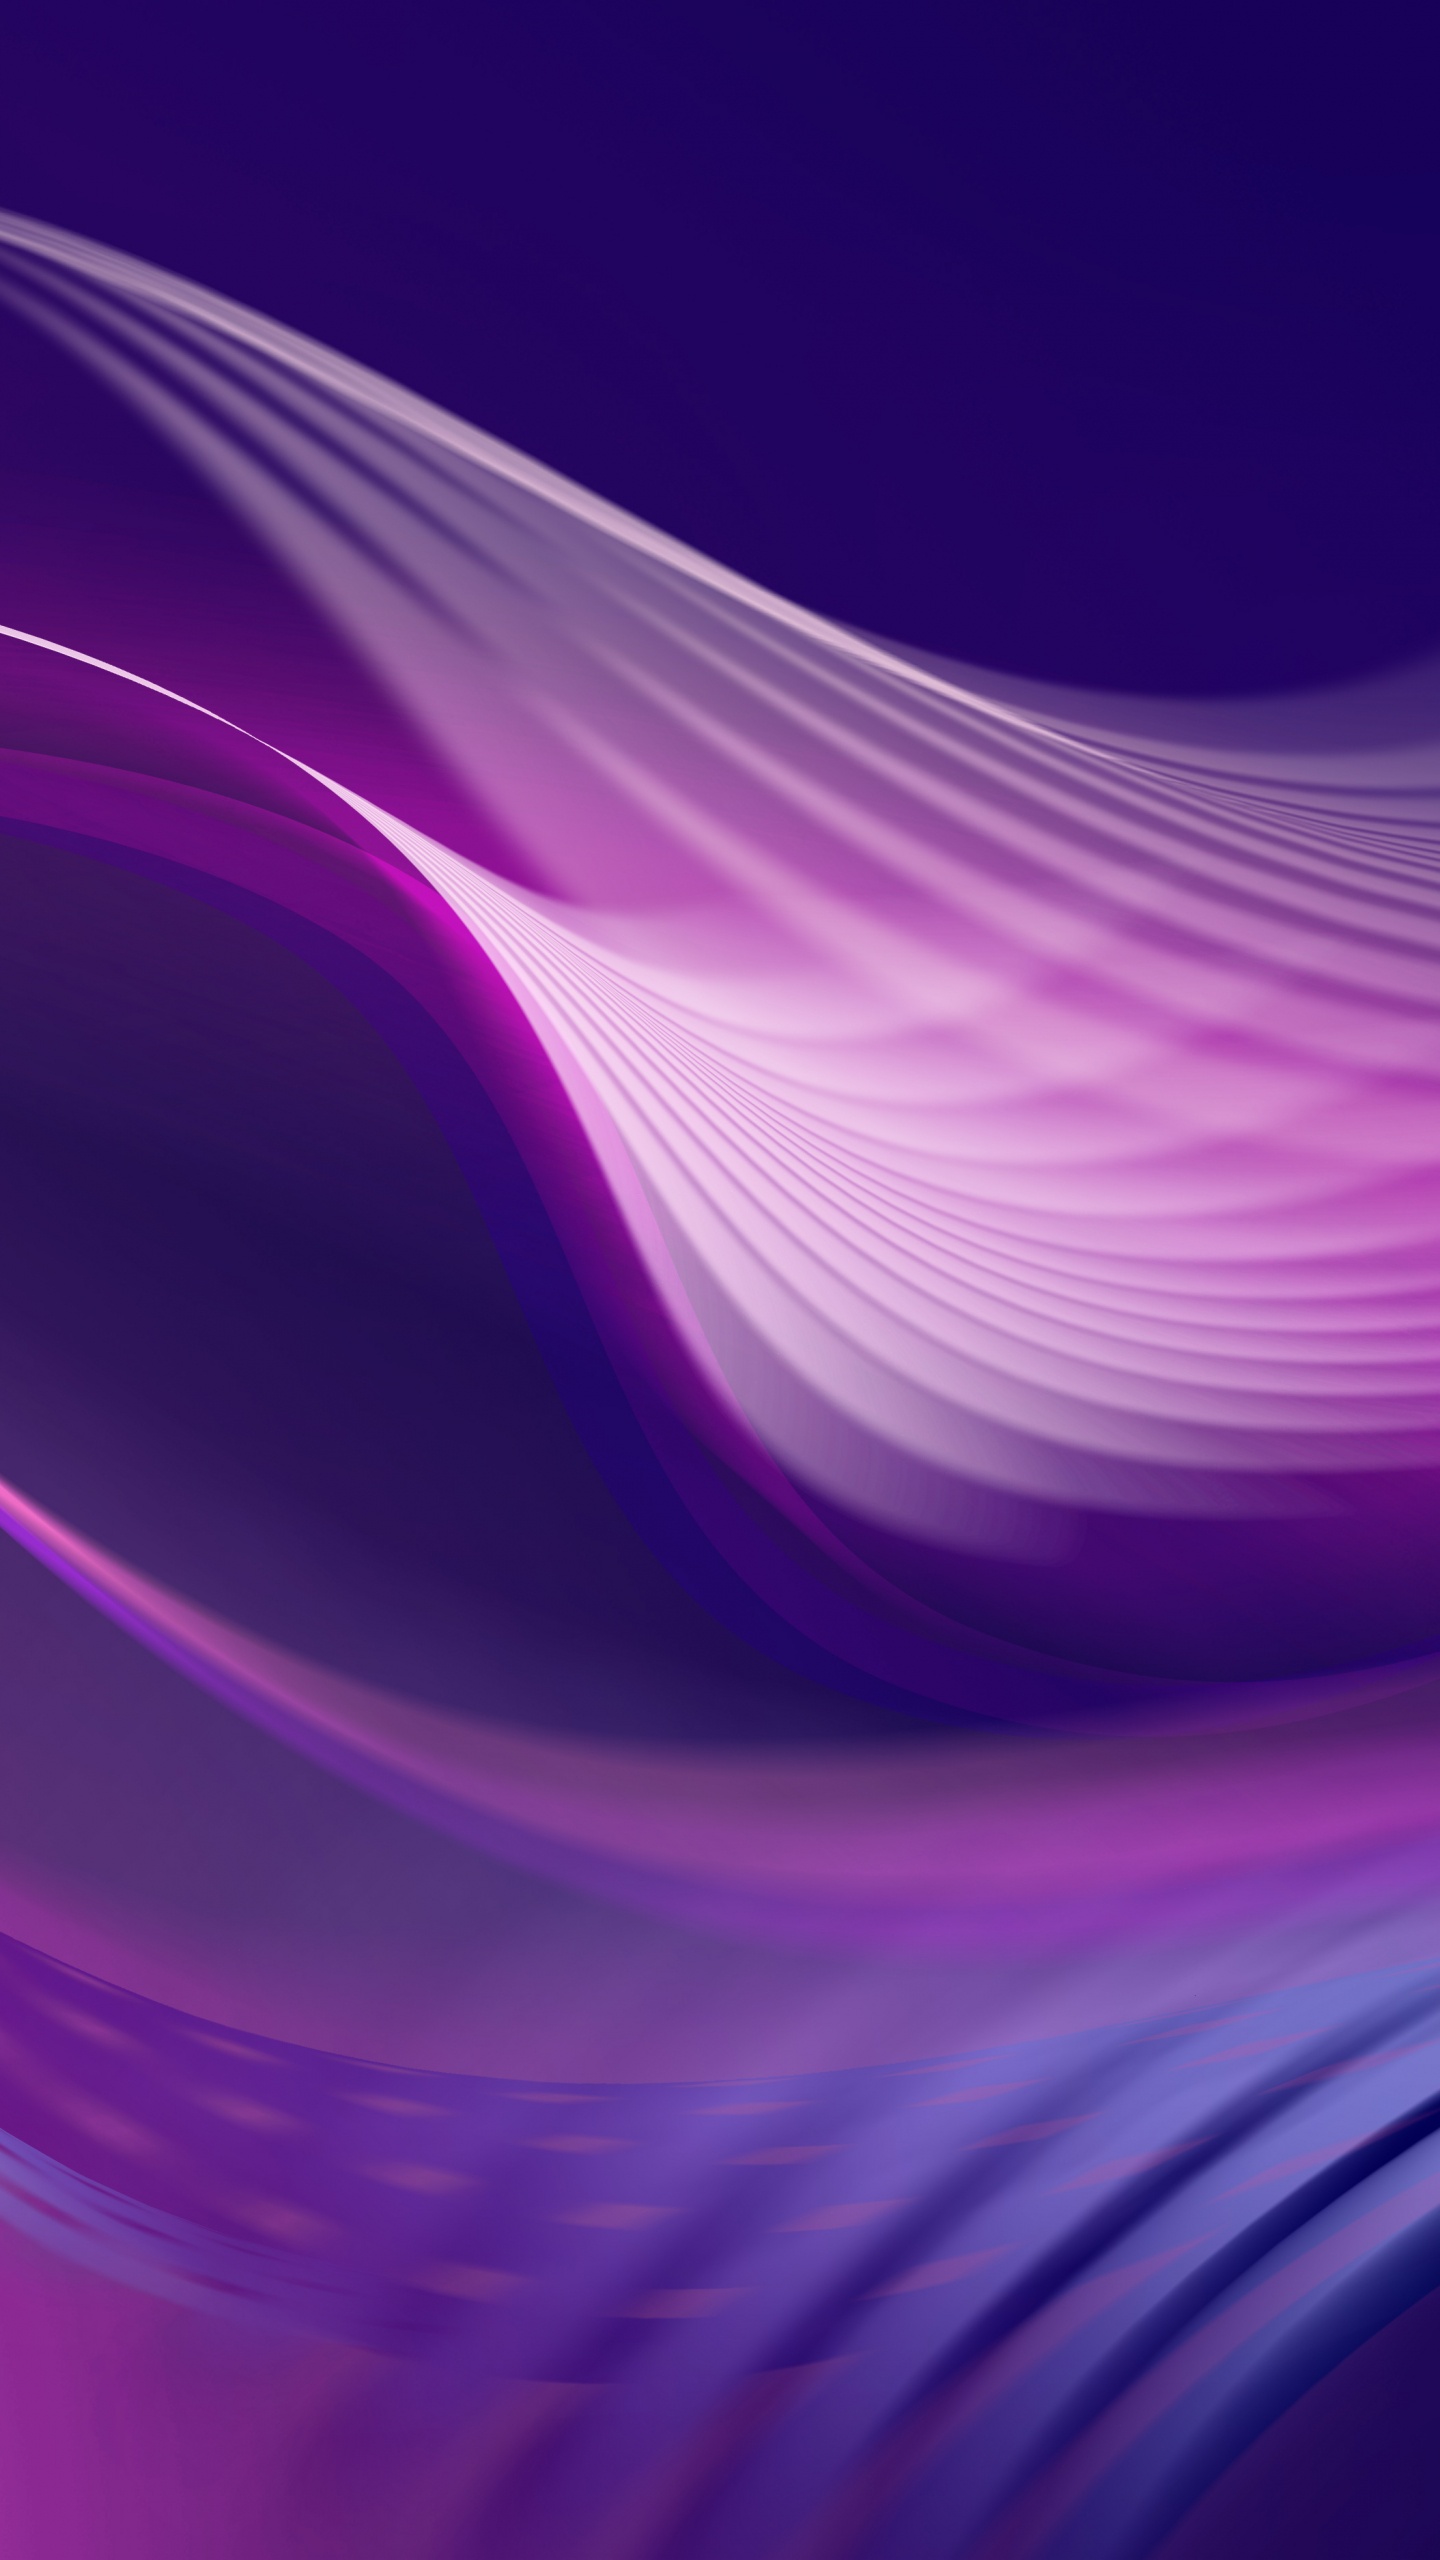 Purple and White Light Illustration. Wallpaper in 1440x2560 Resolution